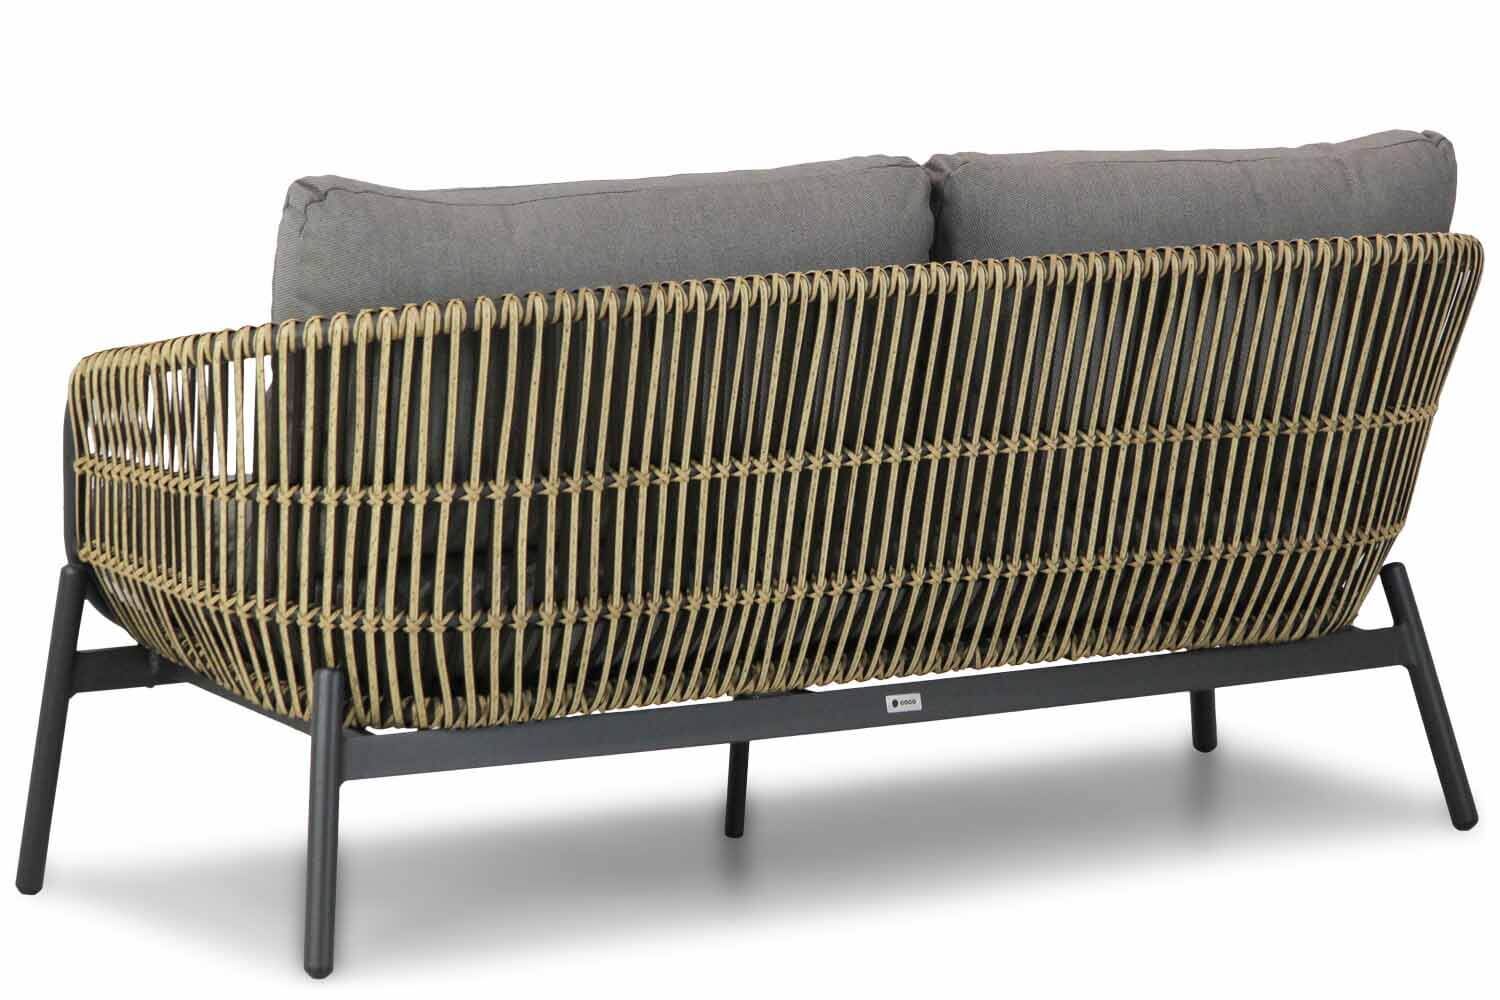 Coco Nathan/Pacific 60 cm stoel-bank loungeset 4-delig